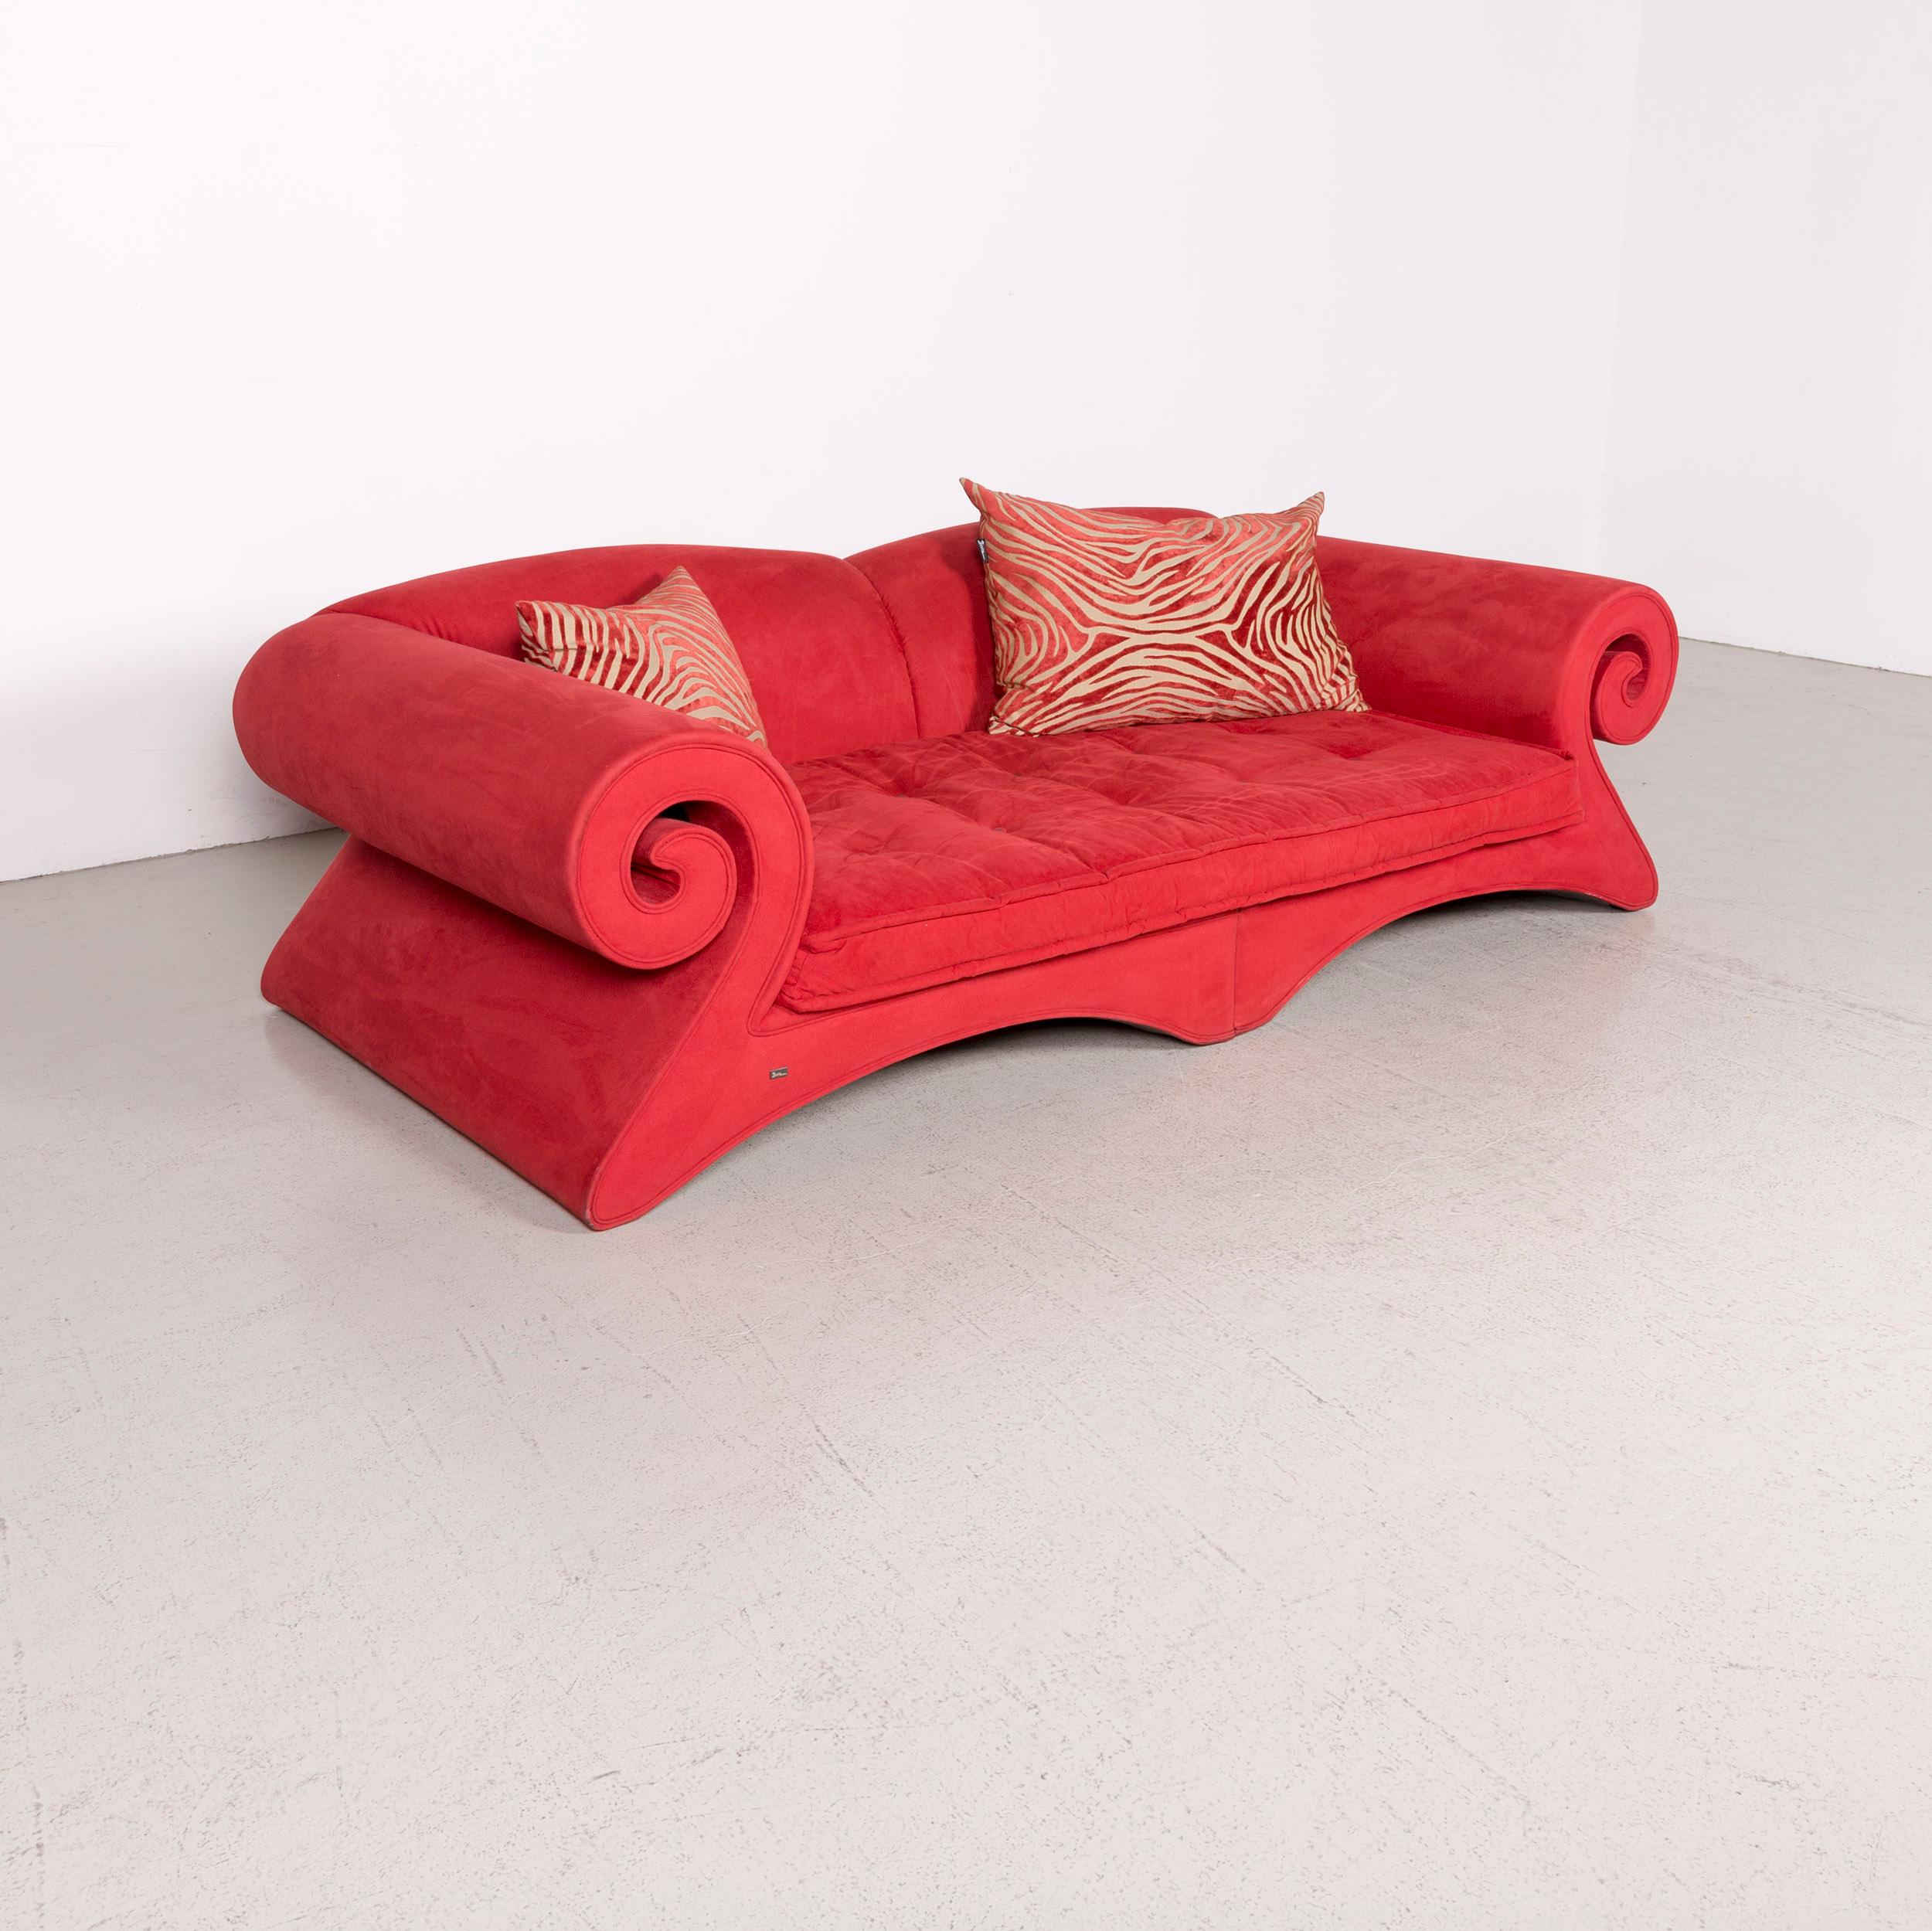 We bring to you a Bretz Mammut G160 designer fabric sofa red couch
 

Product measures in centimeters:

Depth: 135
Width: 275
Height: 85
Seat-height: 40
Rest-height: 75
Seat-depth: 100
Seat-width: 185
Back-height: 50